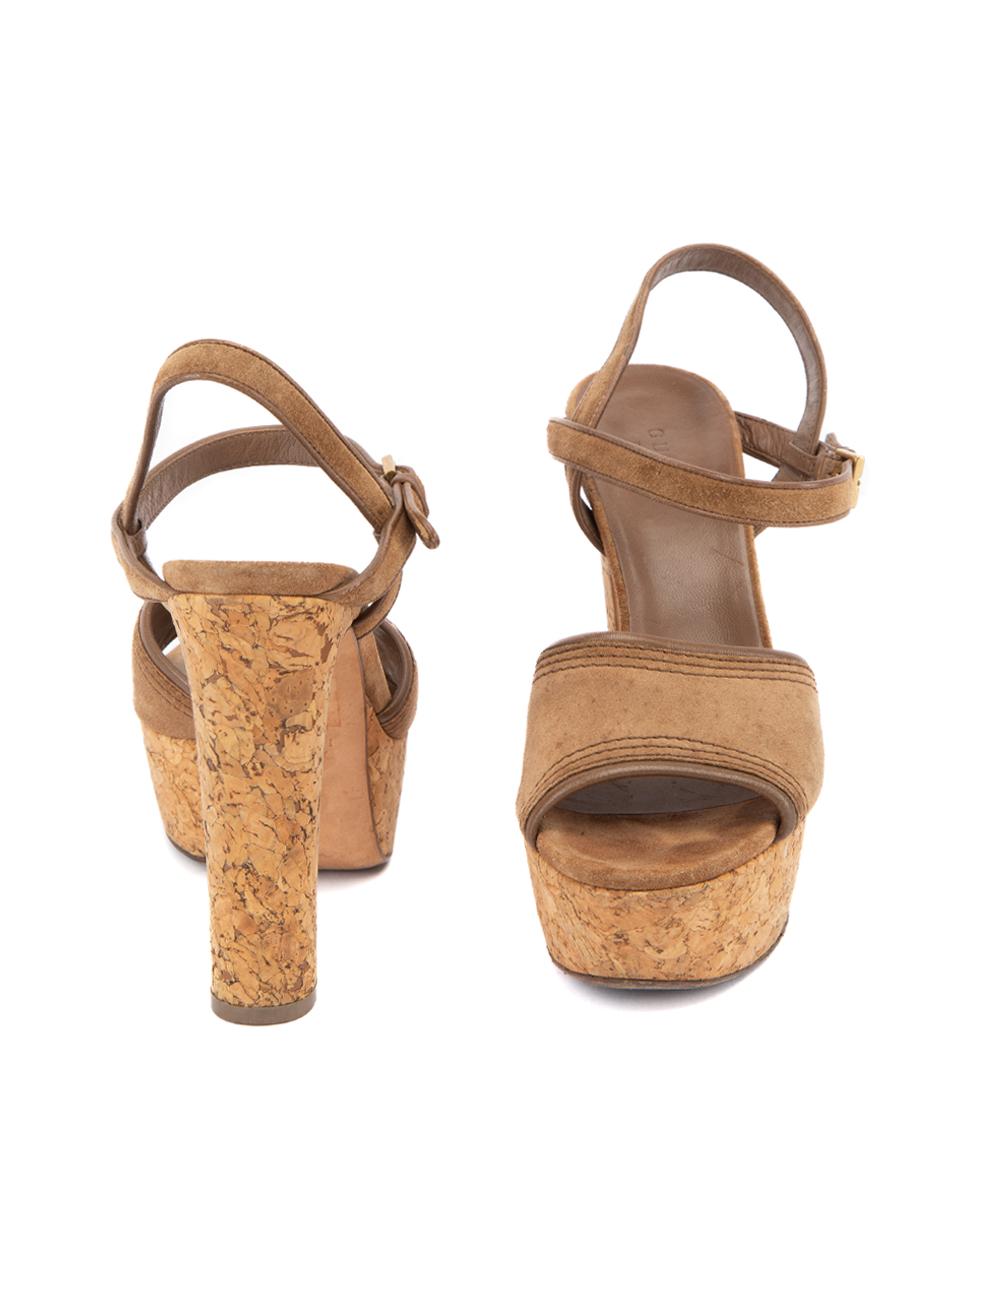 Gucci Women's Brown Suede Cork Heeled Sandals In Good Condition For Sale In London, GB